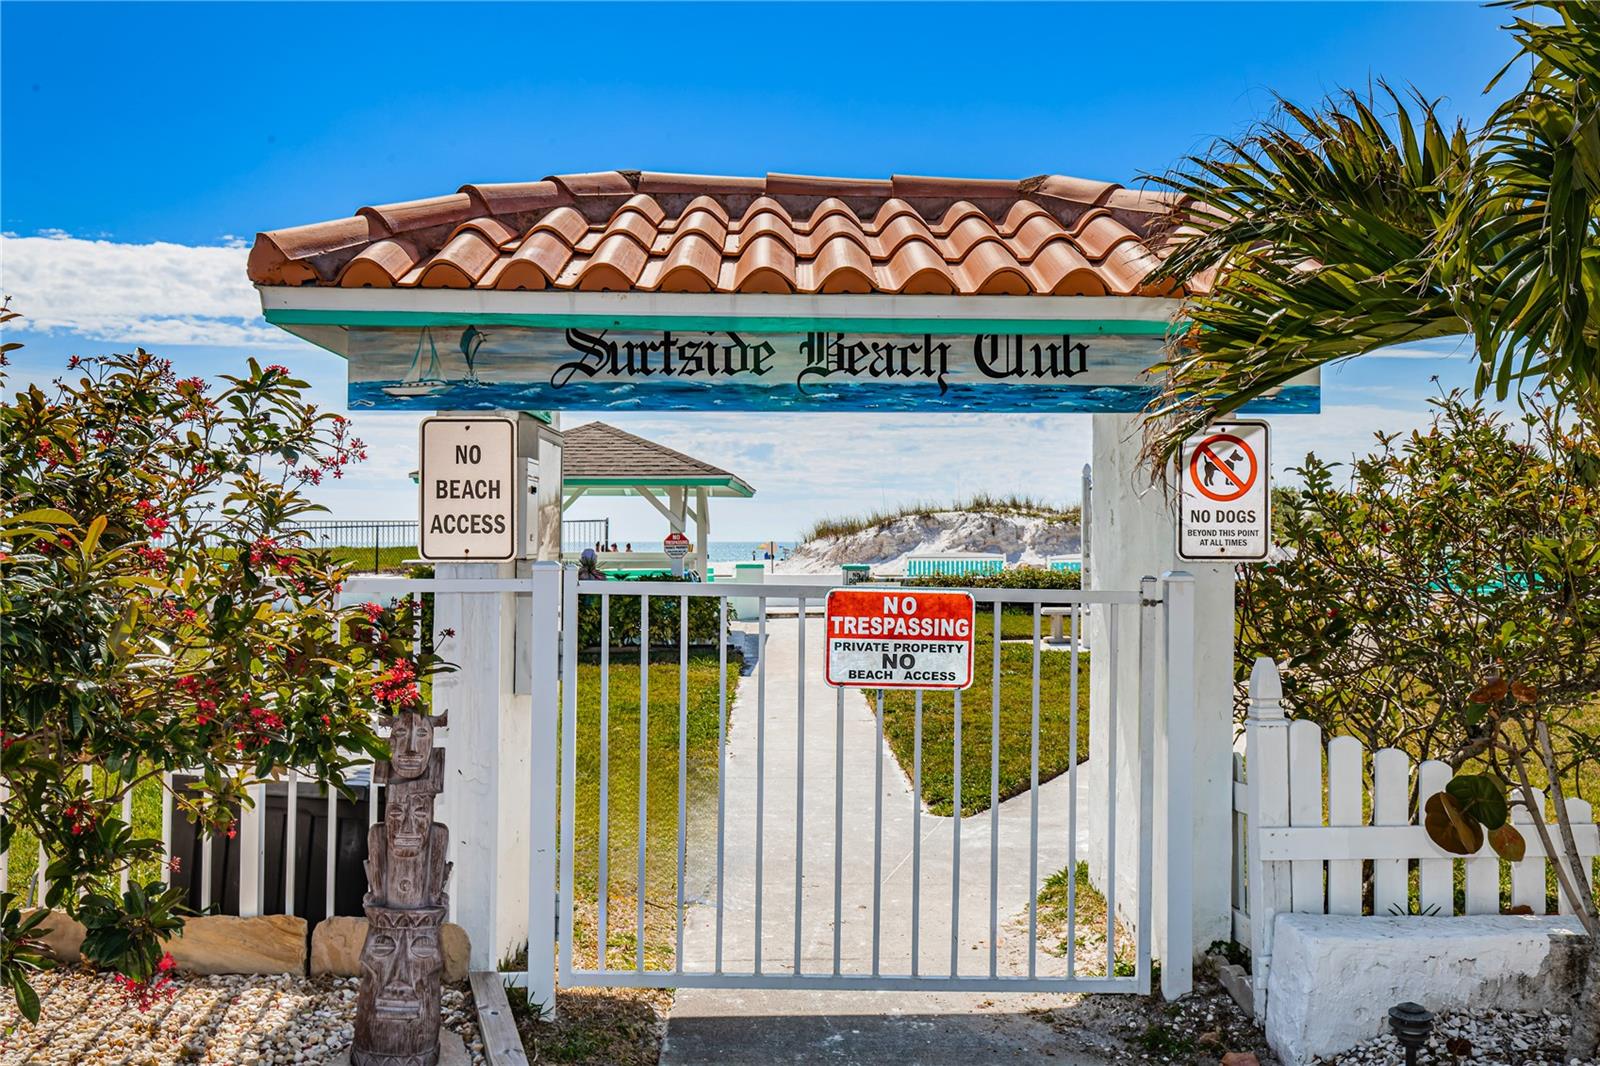 Entrance to the Surfside Beach Club. Your private beach access just a stones throw away from the bungalow. $40 per year.